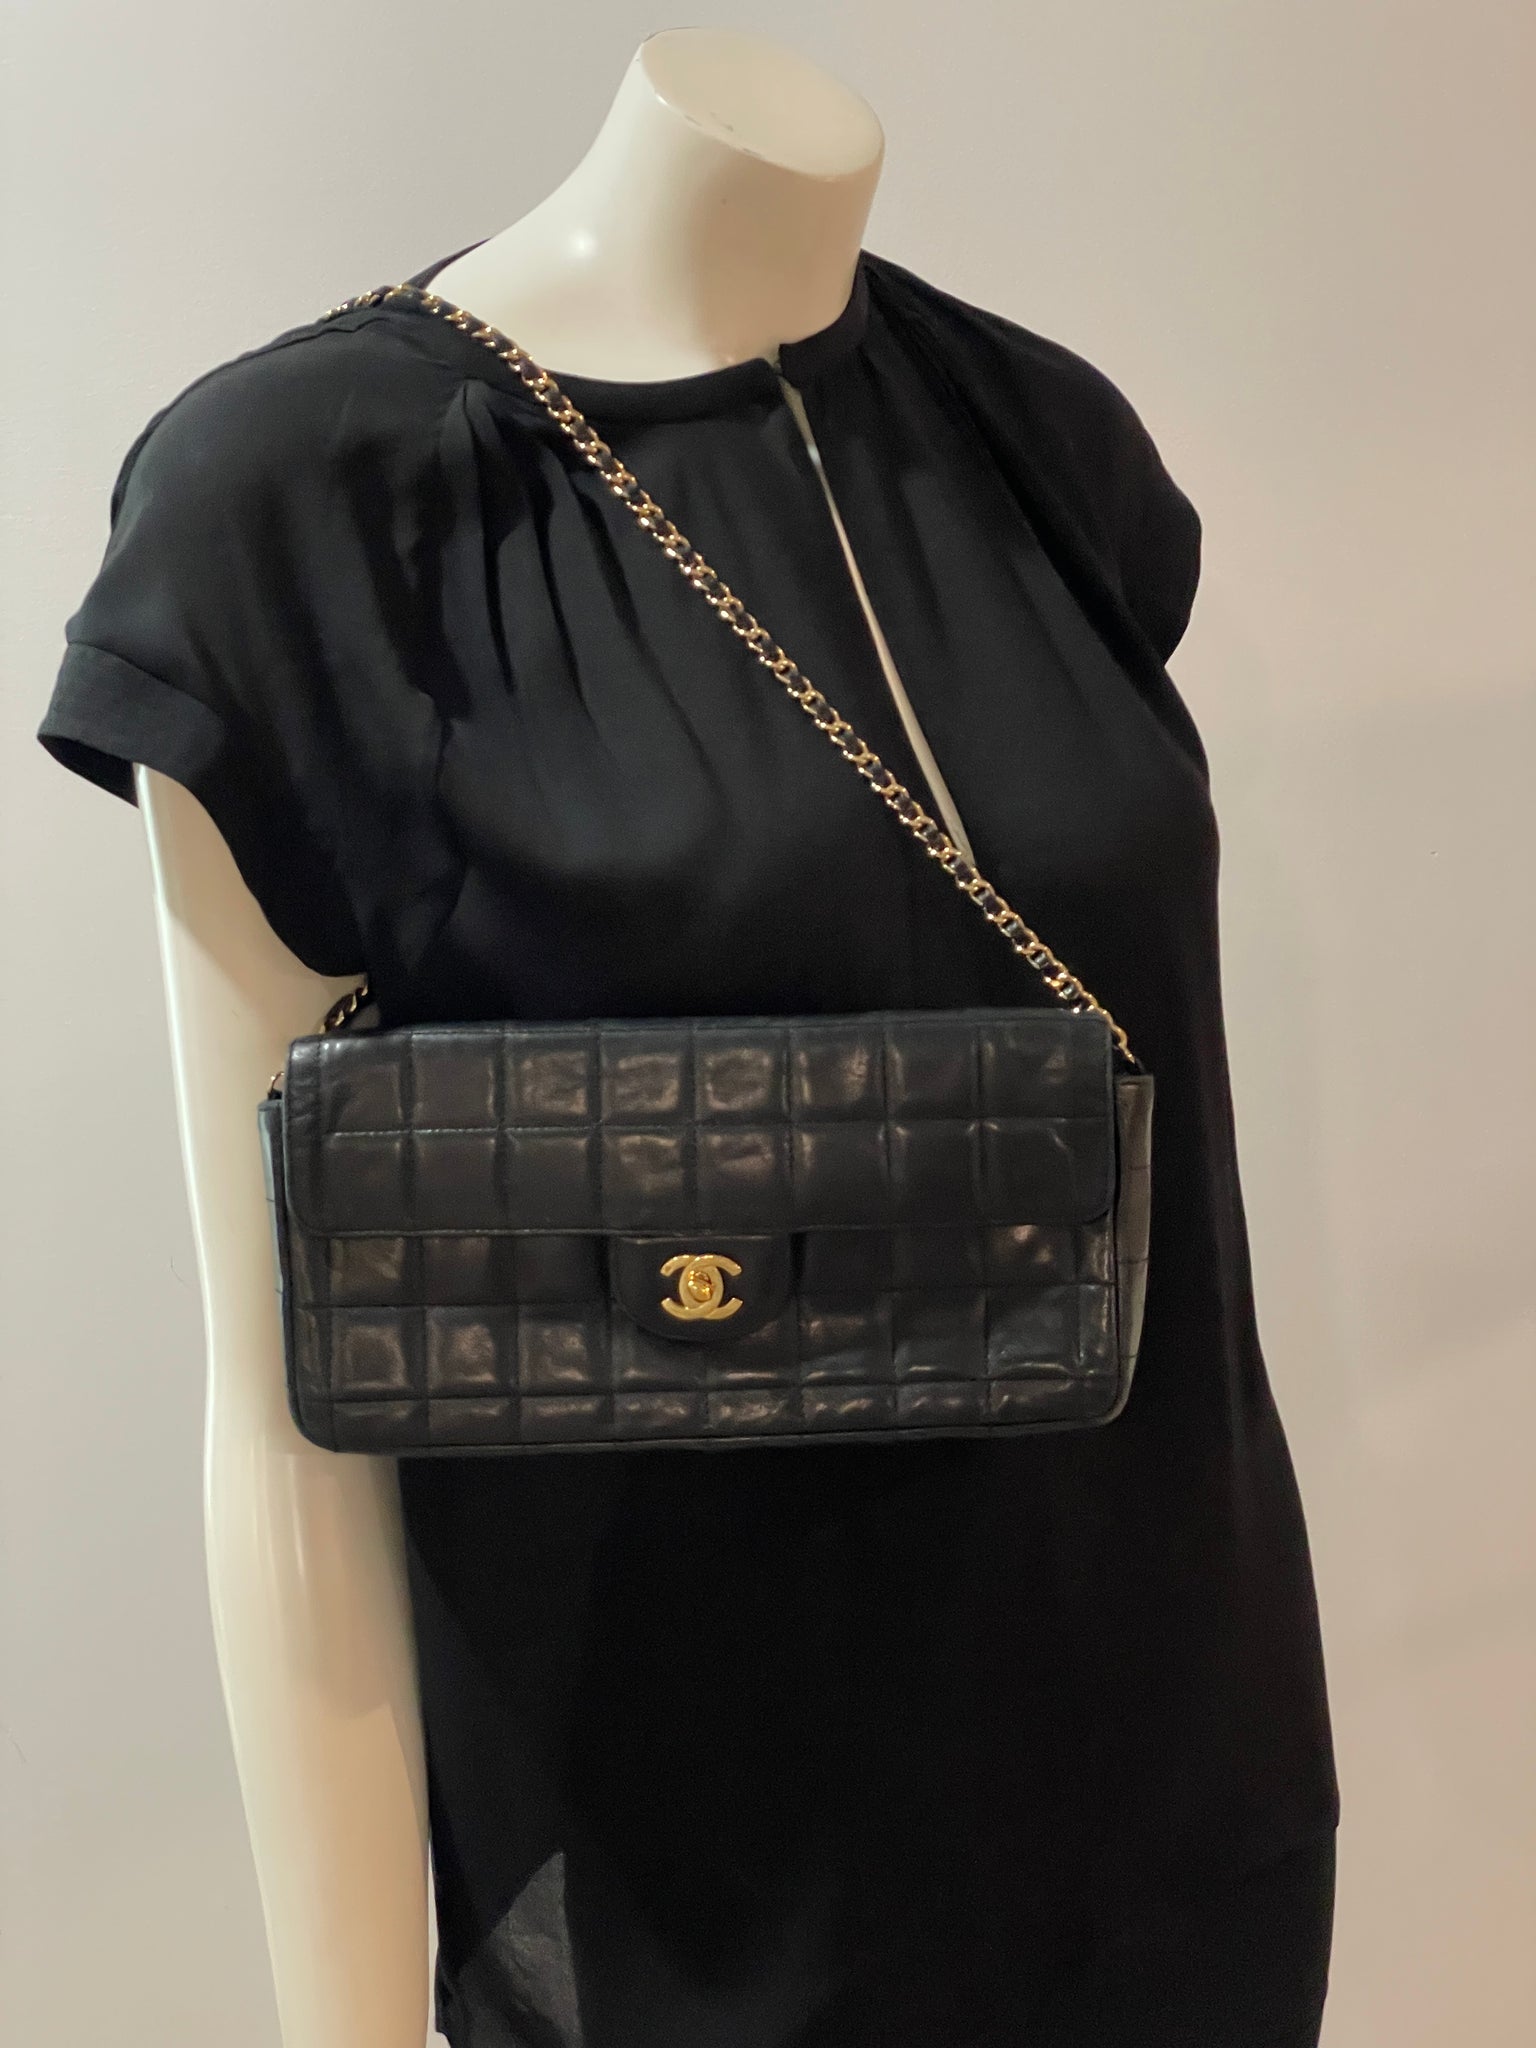 I miss you vintage - Chanel black chocolate bar east west flap bag. . . .  Available in store or purchase online with free ship in Canada. Find  additional photos and details